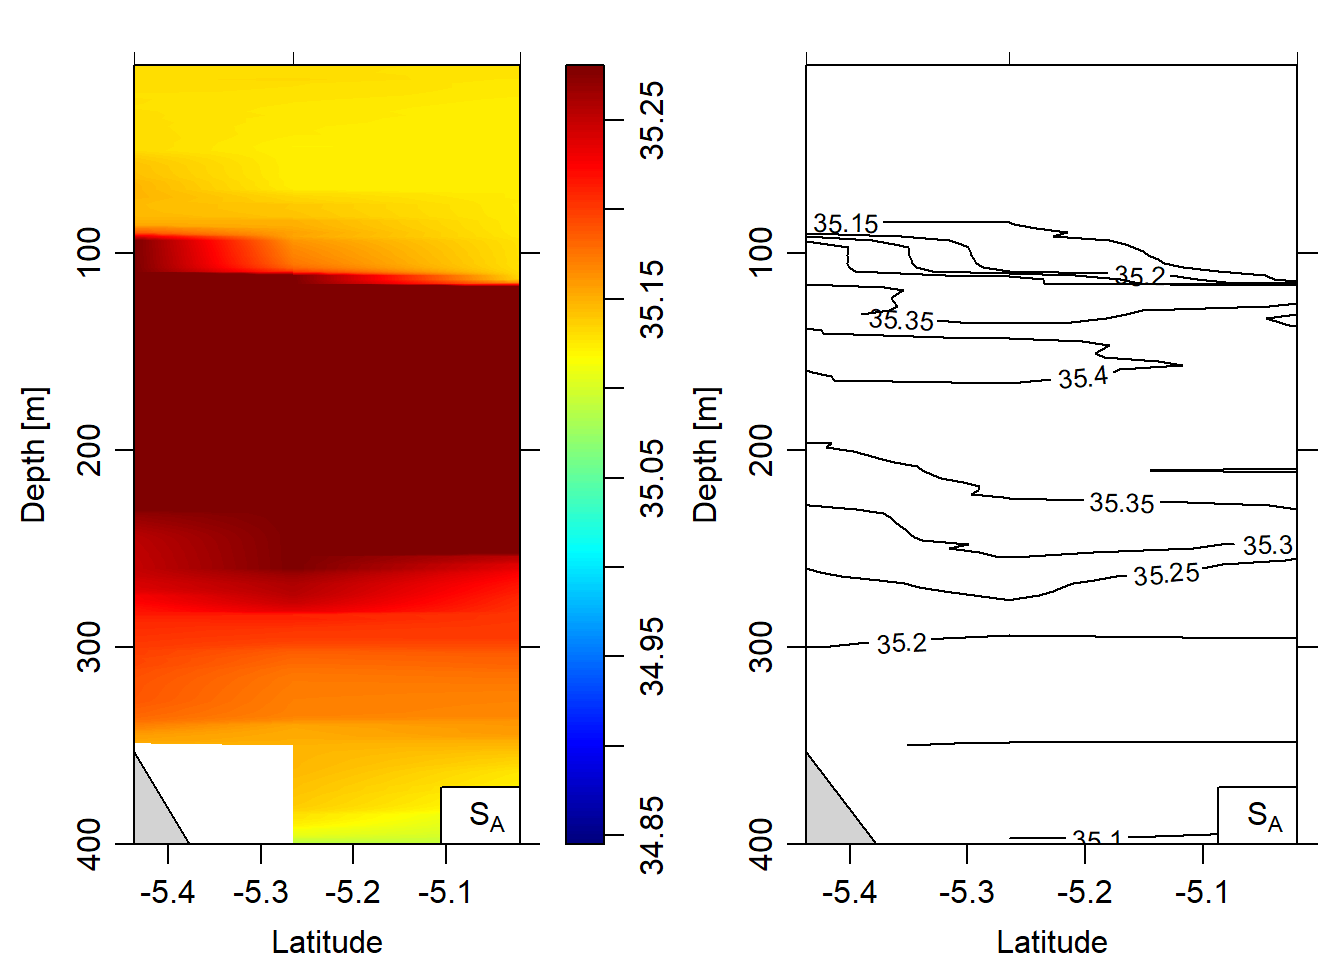 Salinity section plotted as contour and image